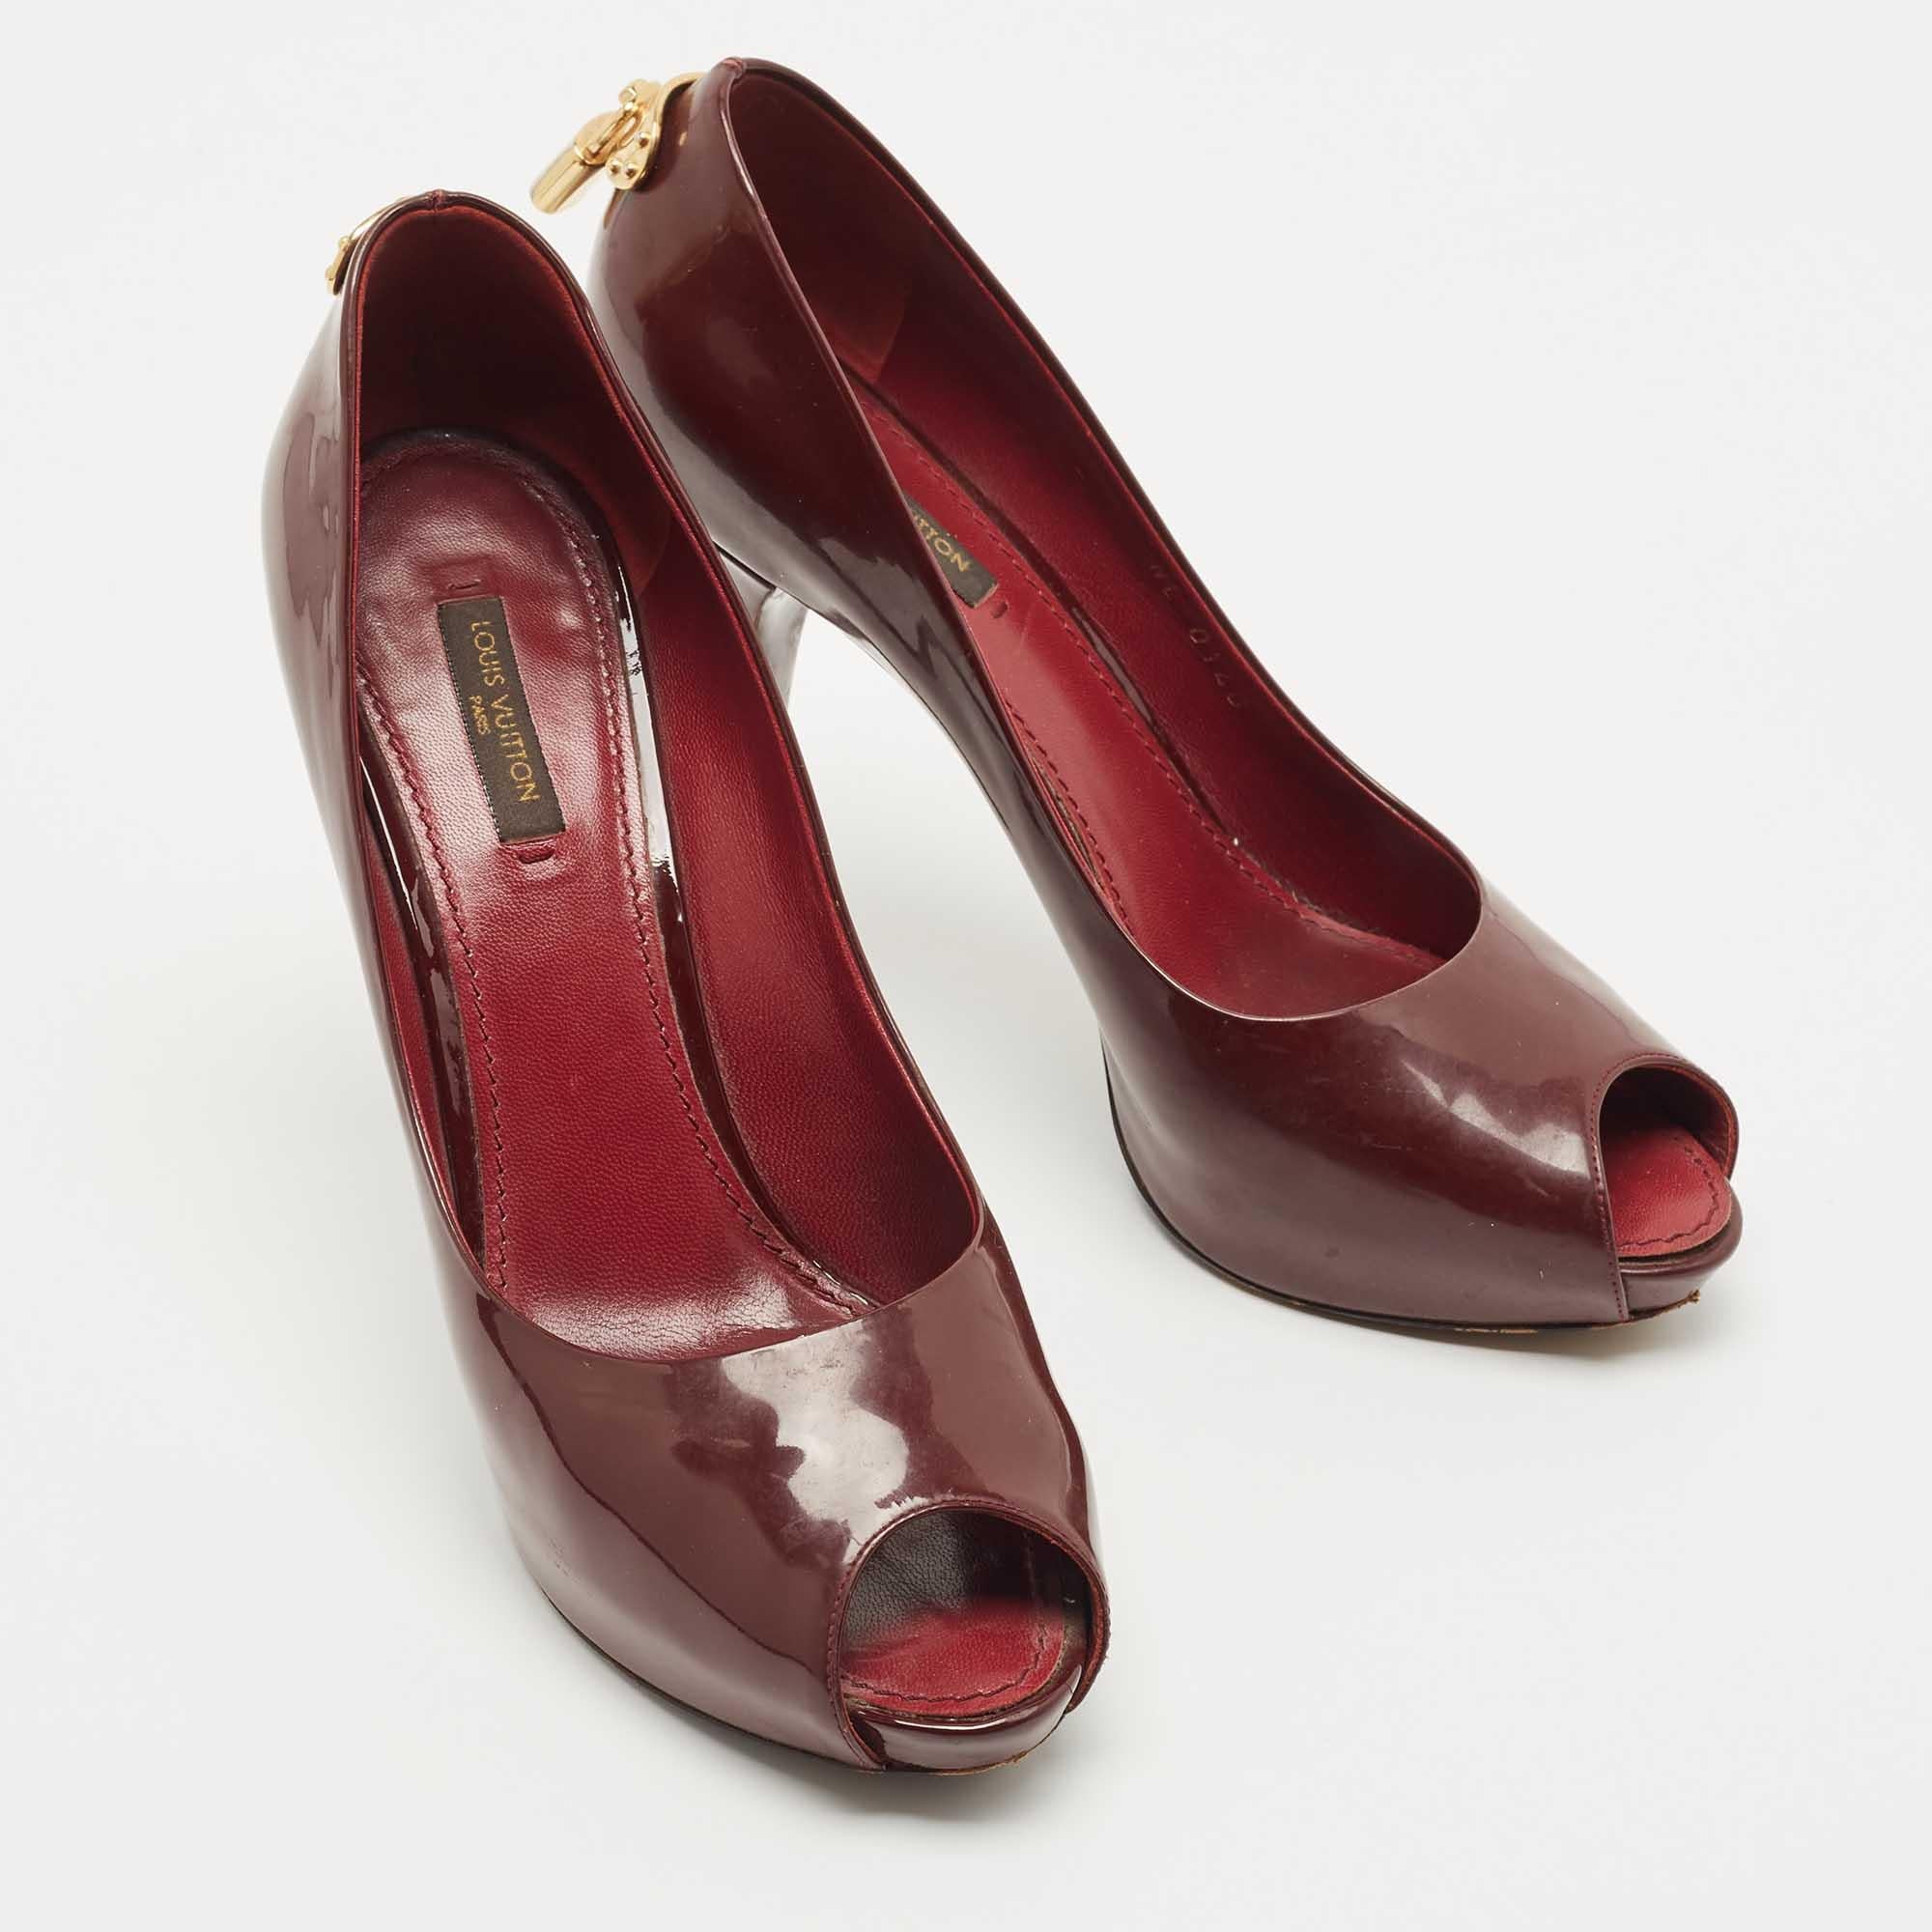 Louis Vuitton Burgundy Patent Leather Oh Really! Pumps Size 39 In Good Condition For Sale In Dubai, Al Qouz 2